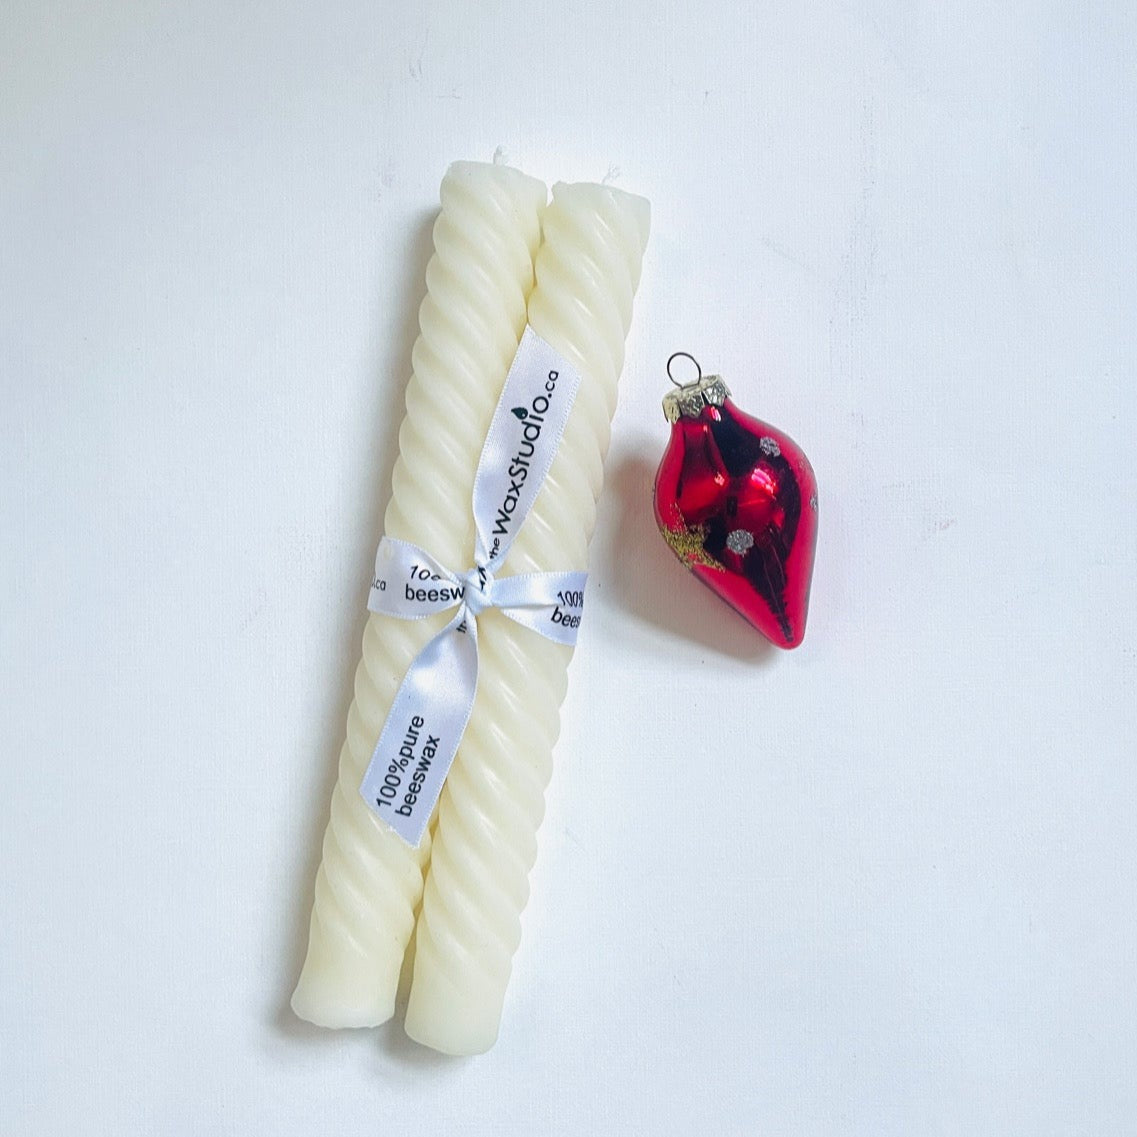 White Beeswax Spiral Tapers - Pair of Two 8" - Beeswax Tapers - Candles - Beeswax Candles, Twisted Taper Candles